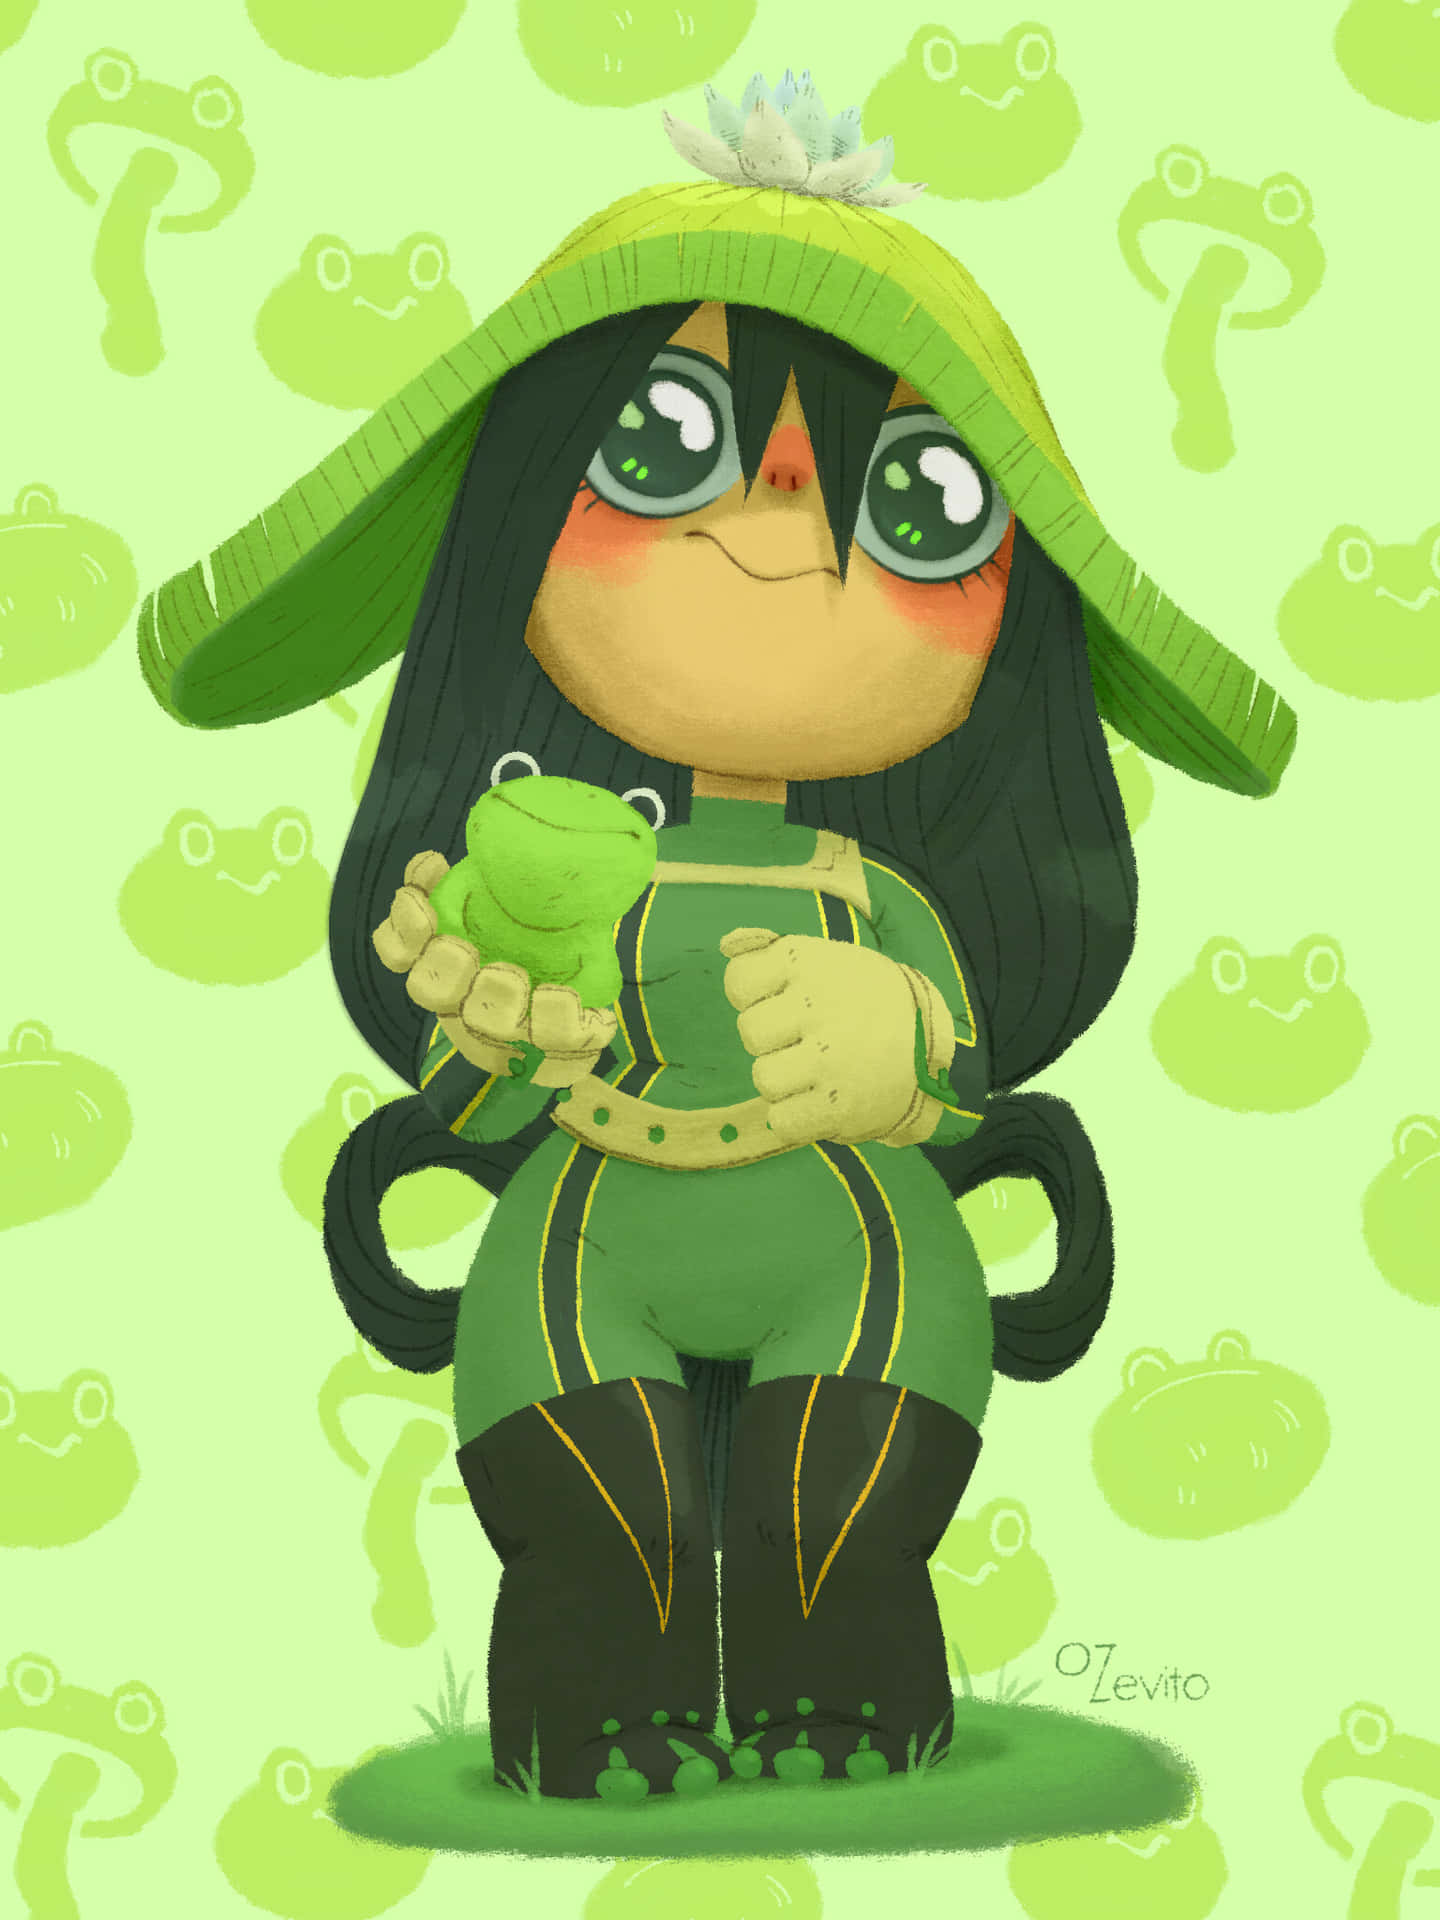 Celebrate the vibrancy of life with Froppy!